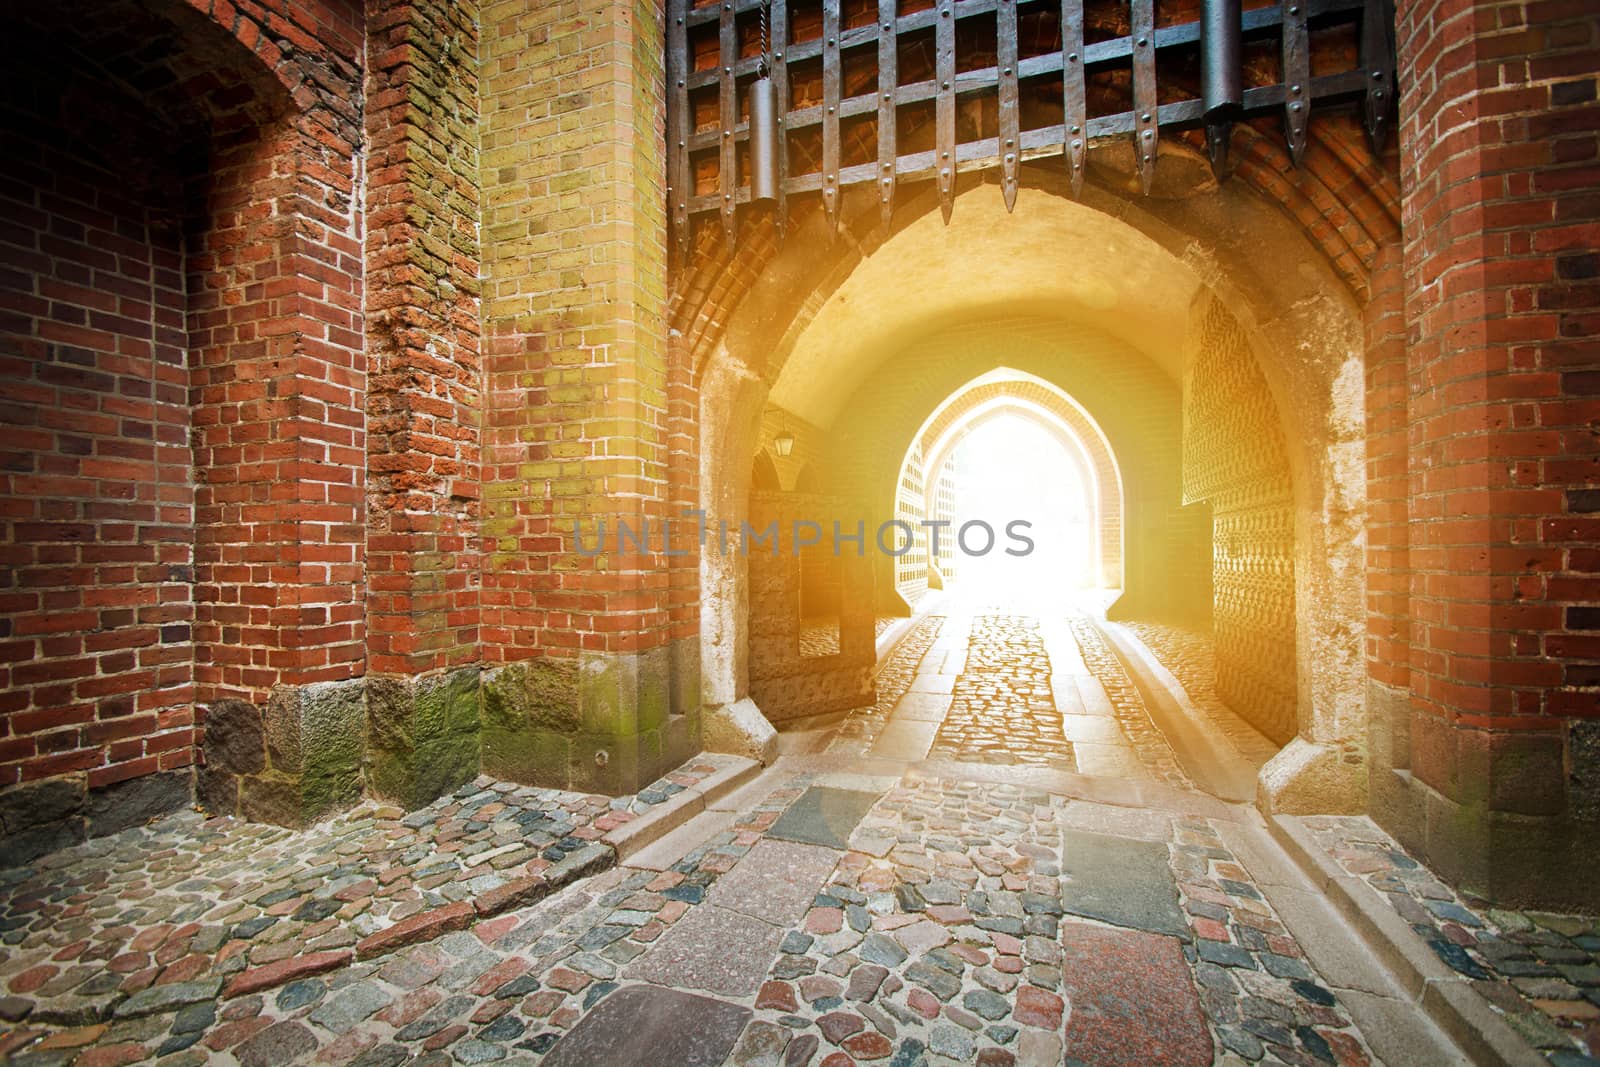 Old medieval entrance gate bathed in the light of the sun.